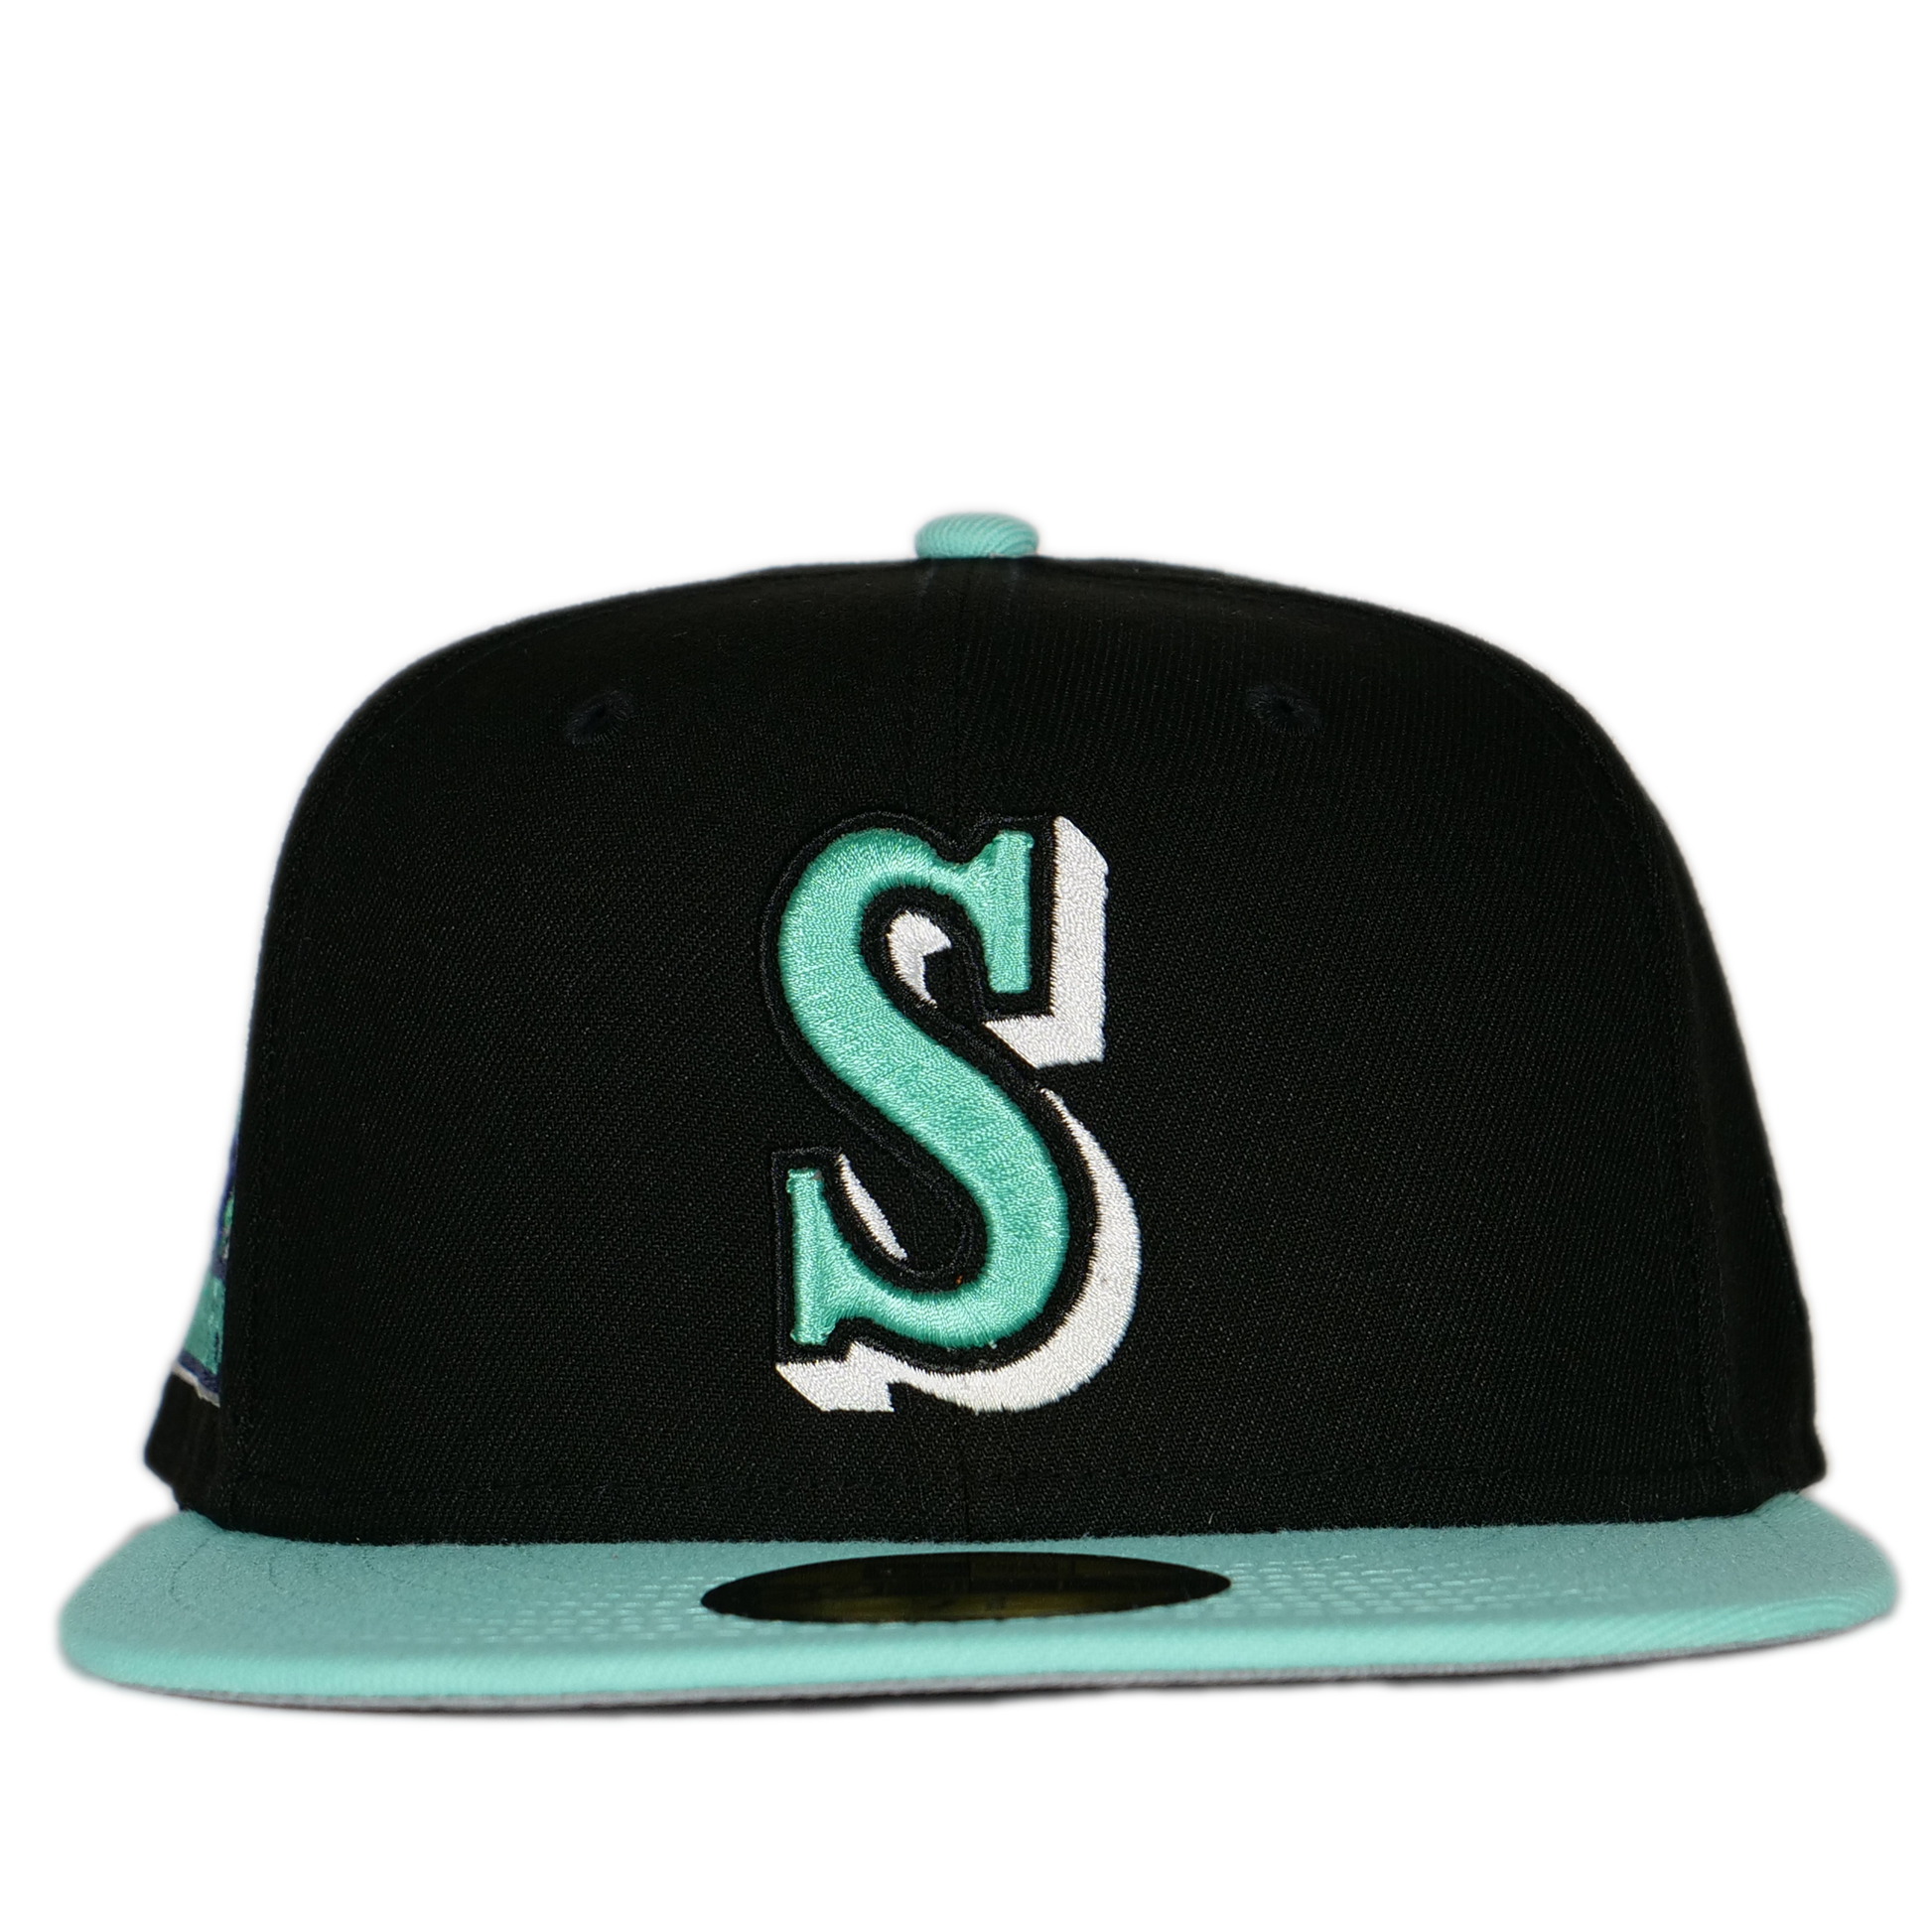 KTZ Seattle Mariners Retro Stock 59fifty Fitted Cap in Blue for Men